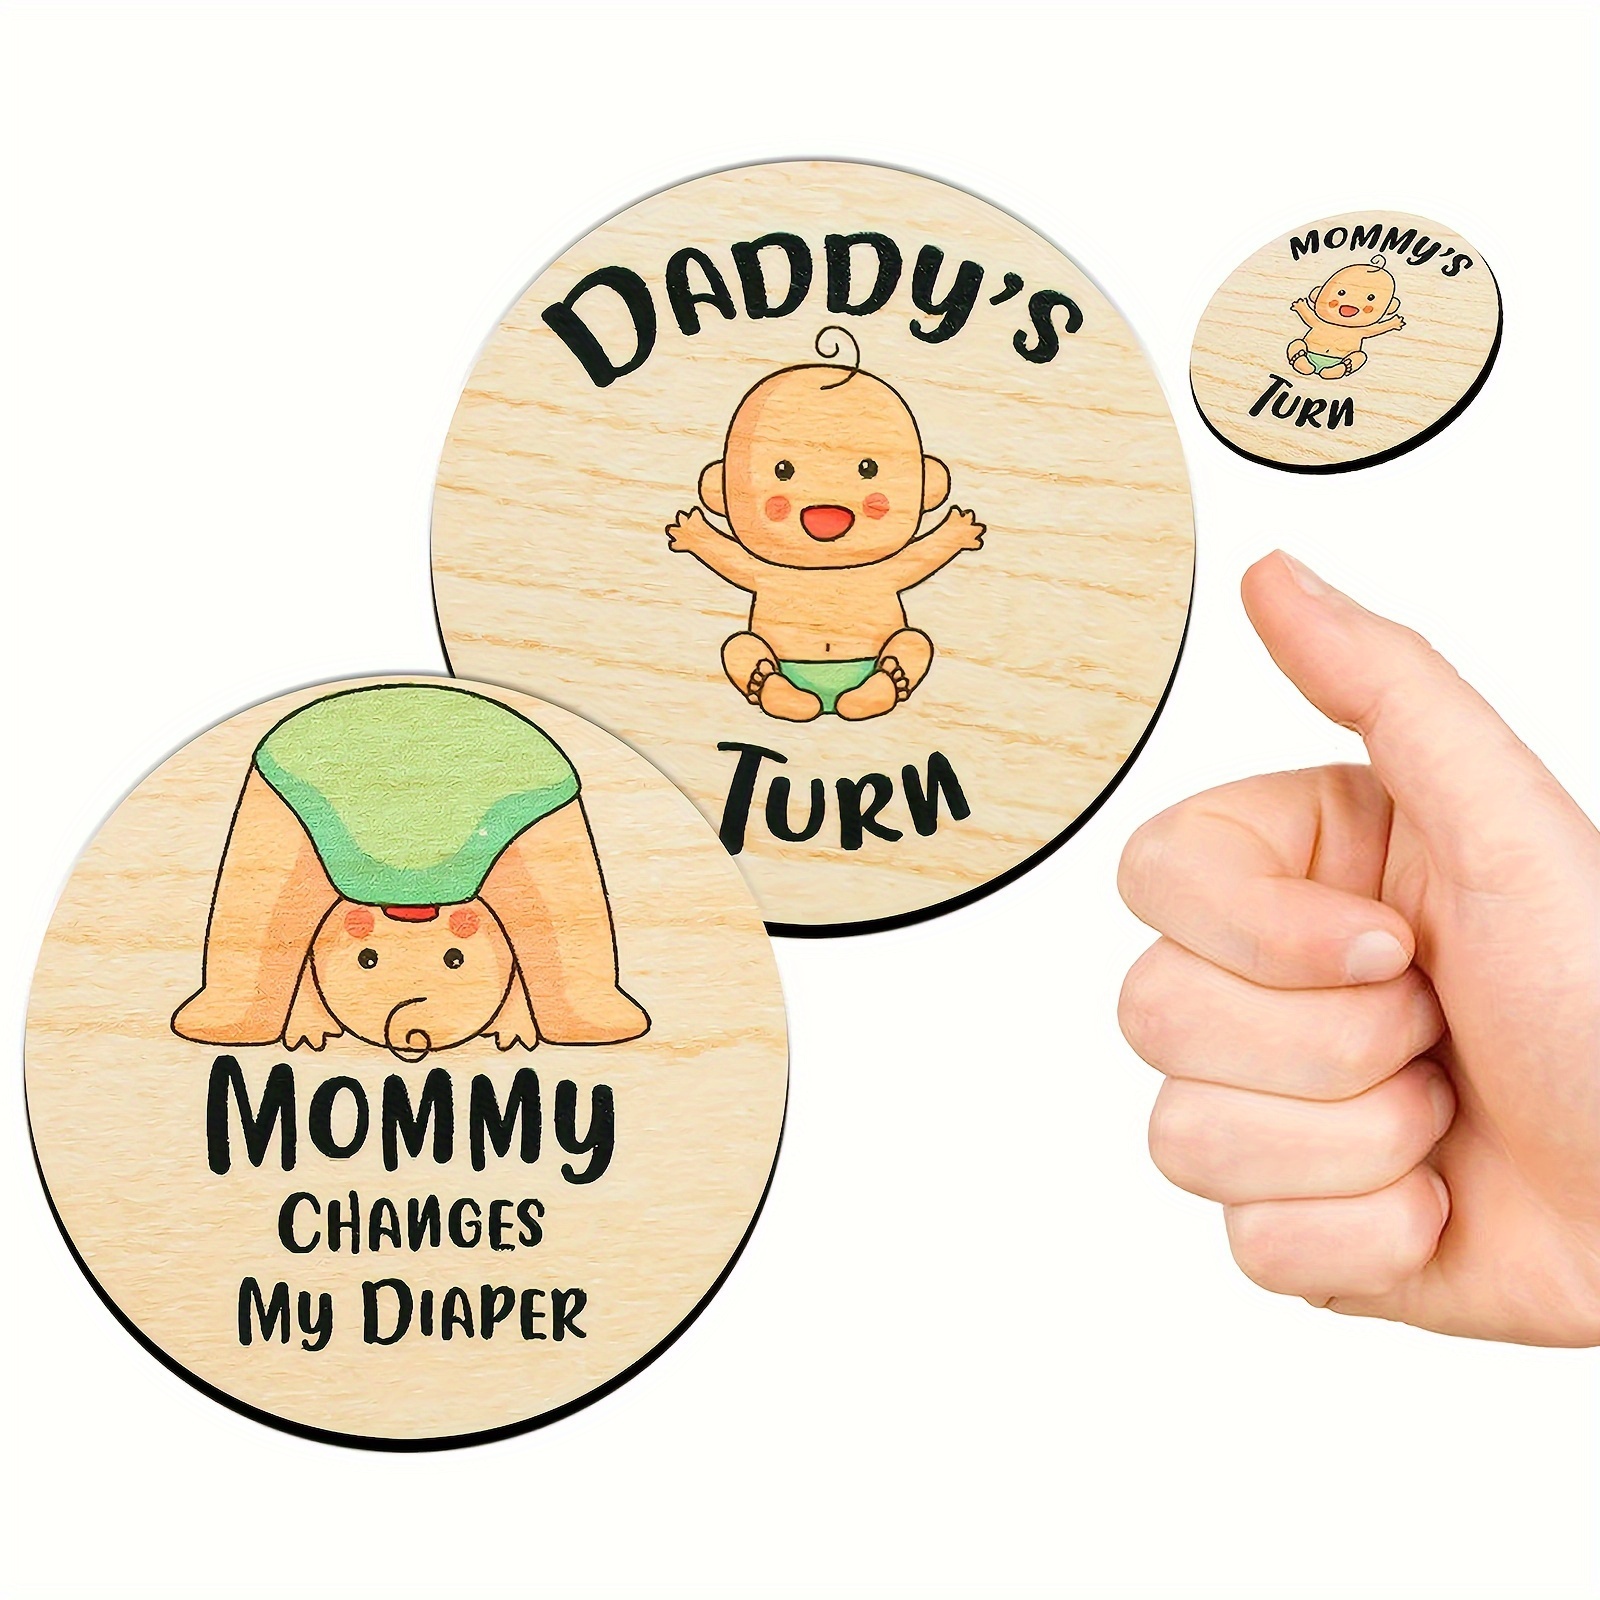 New Baby Gifts for Parents,Double-Sided Decision Coin Gift for New Mom & Dad,Funny Baby Shower Gifts for Couple,Gifts for Pregnant Women As